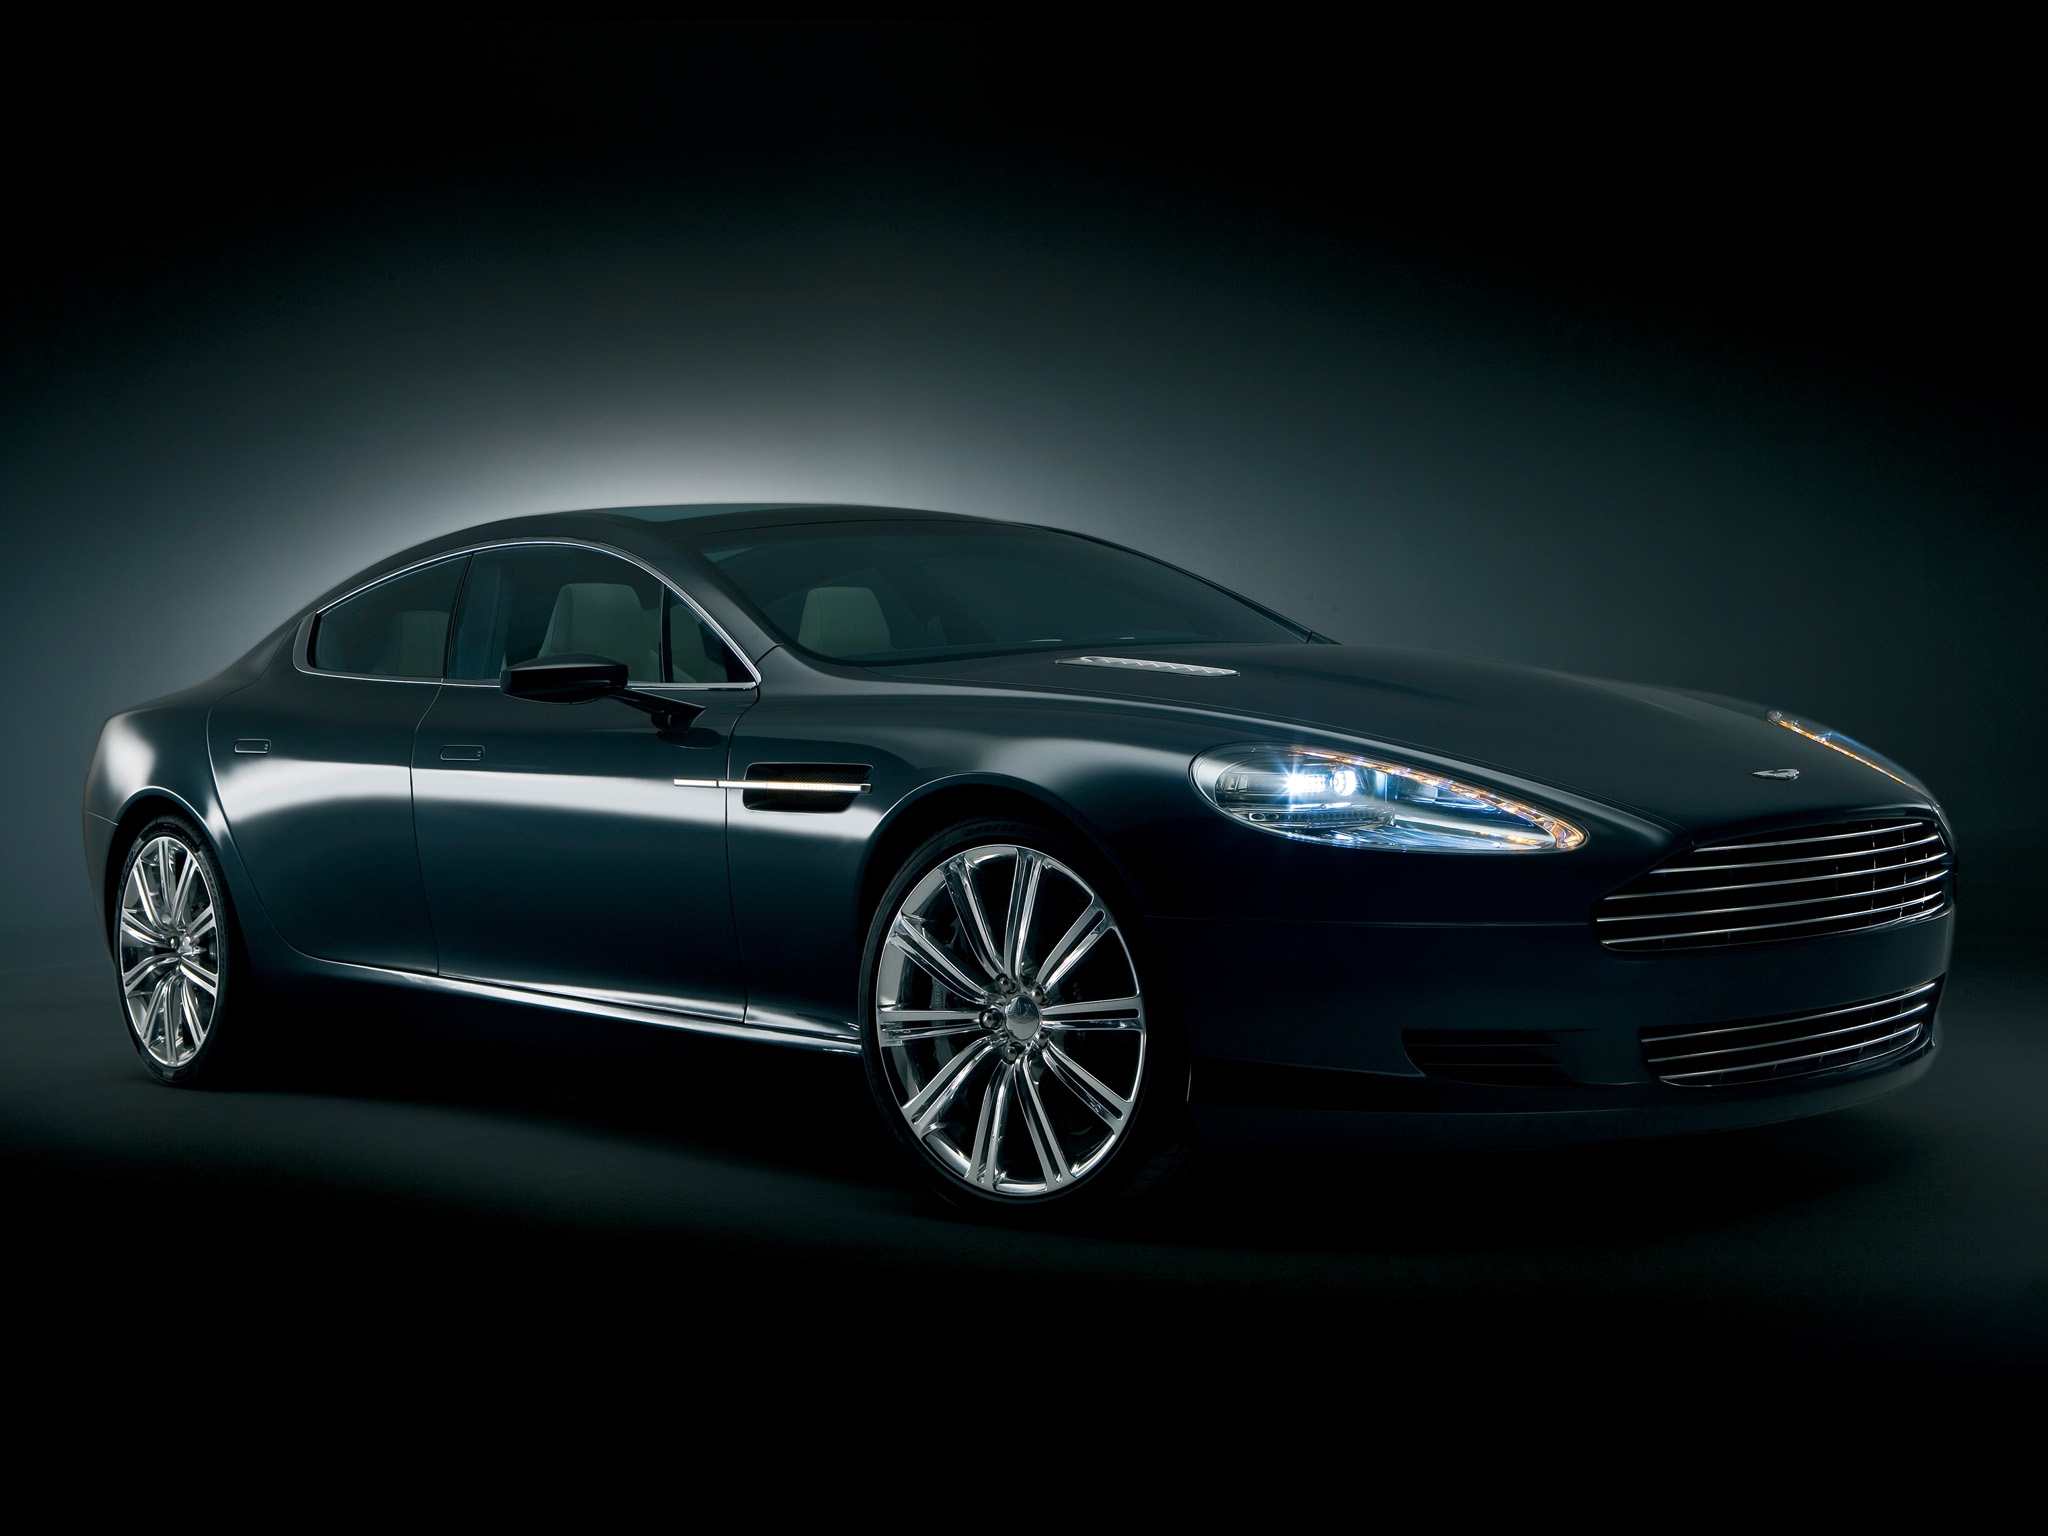 cars, black, aston martin, side view, style, concept car, 2006, rapide Full HD